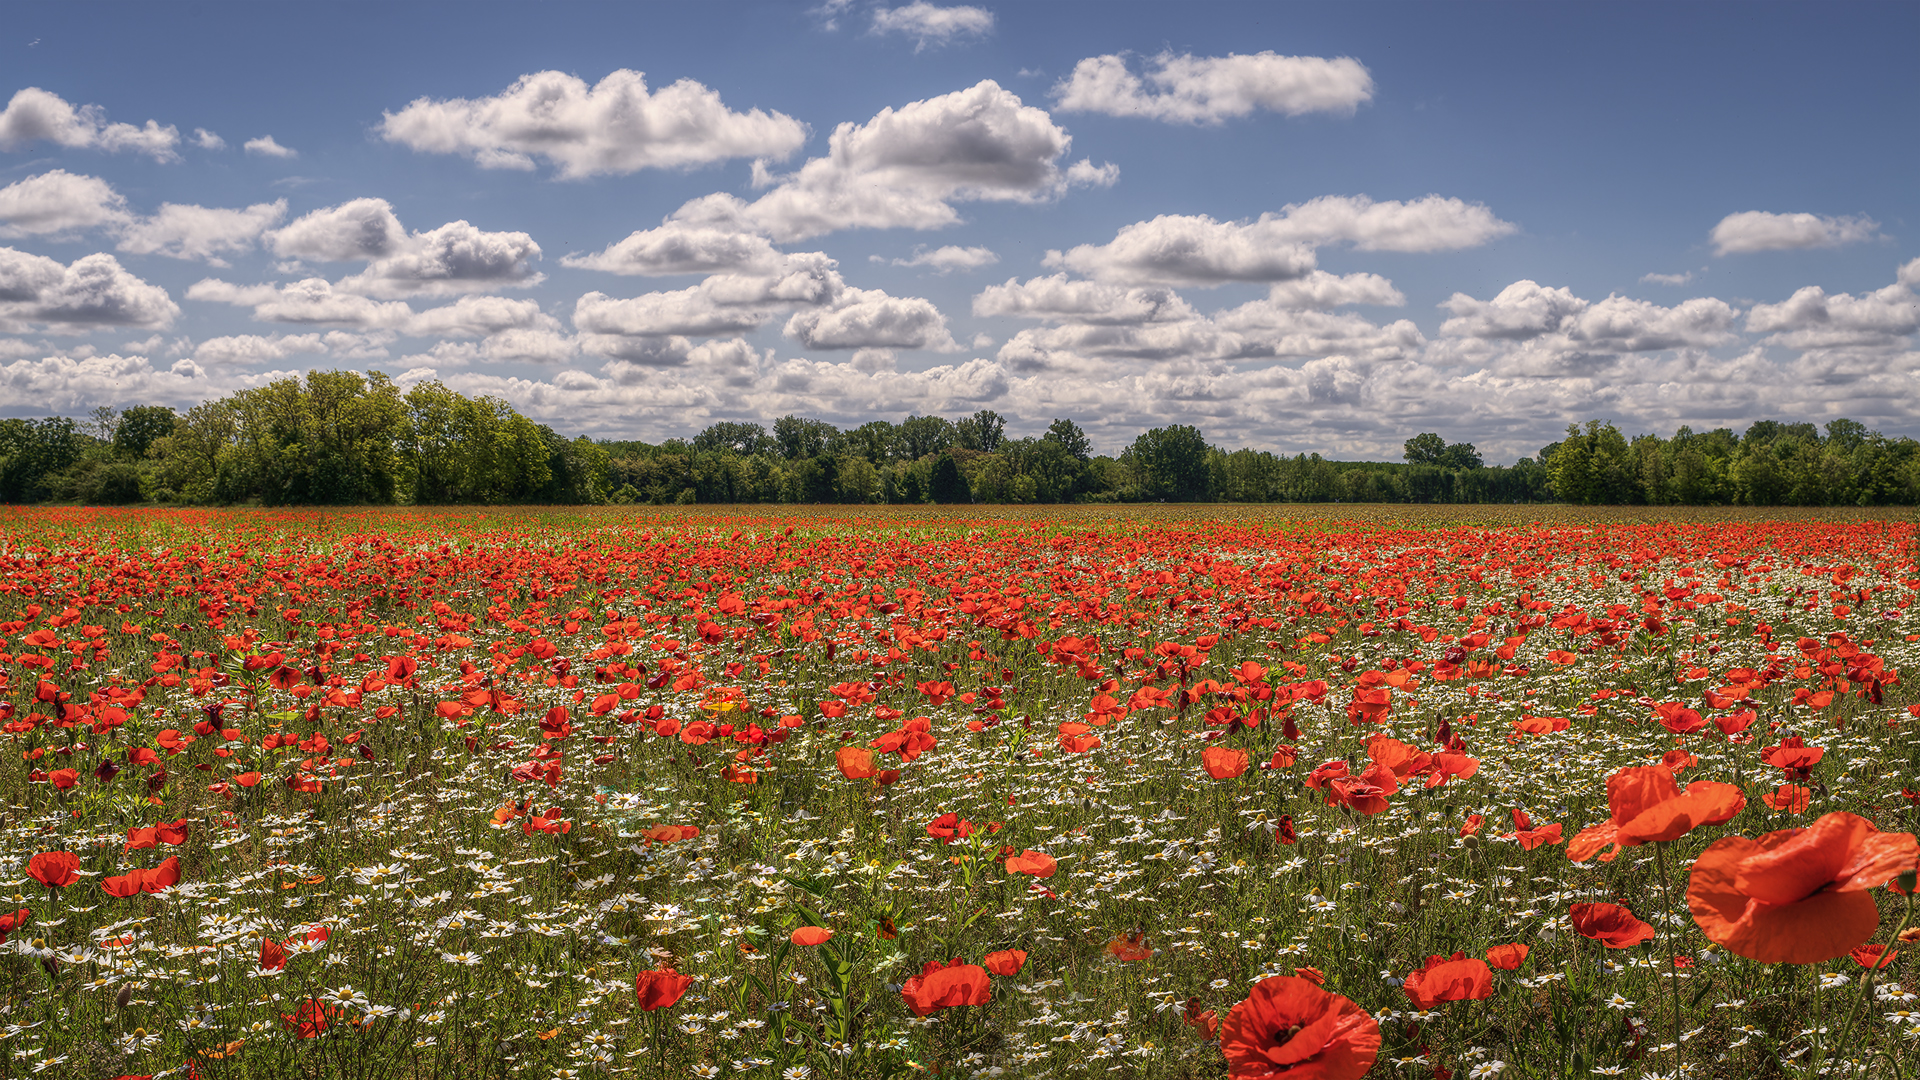 Clouds and poppies...